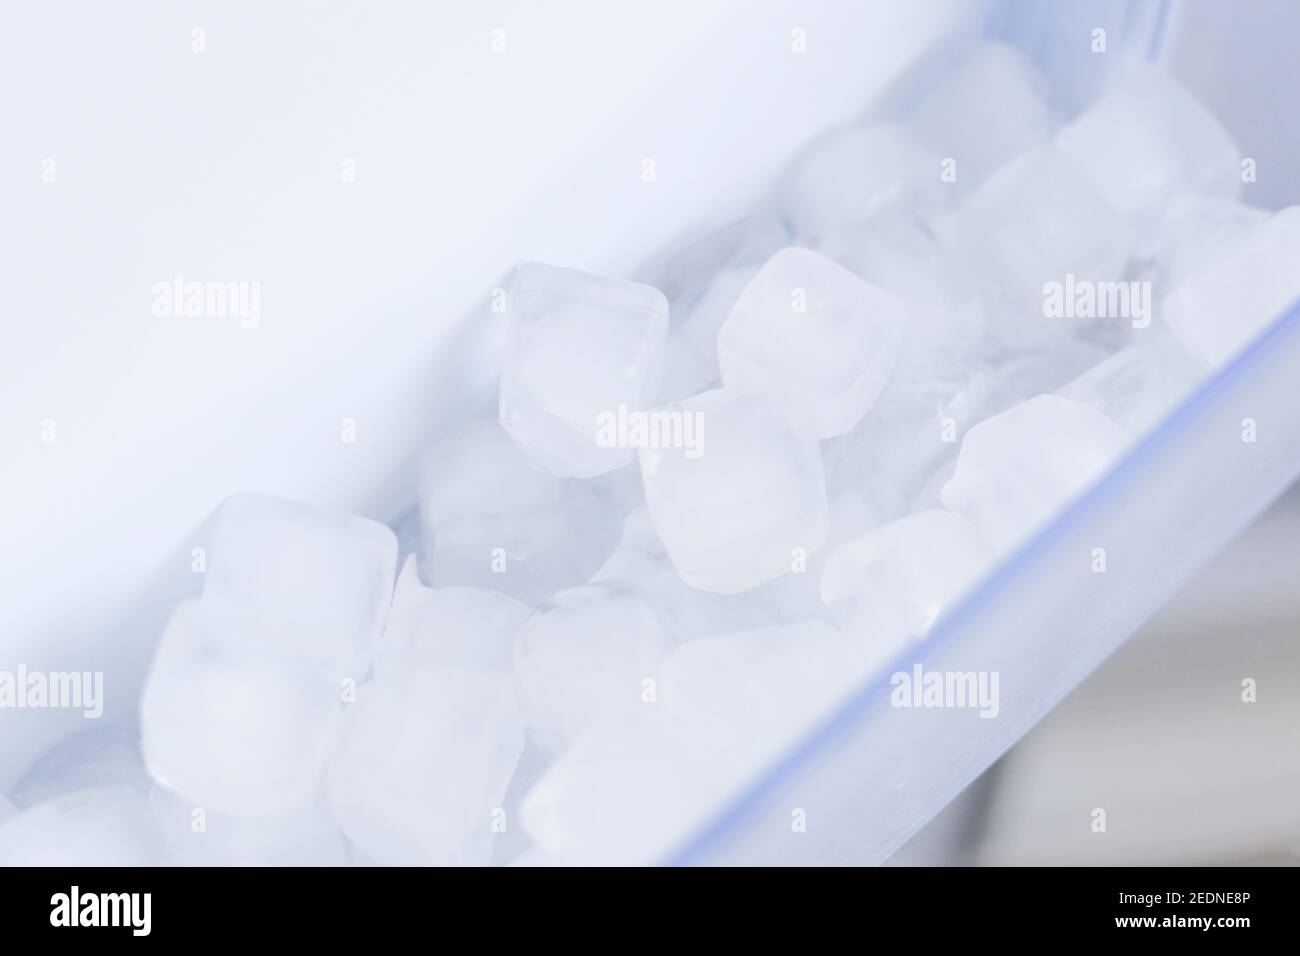 A Woman Opens An Ice Maker Tray In The Freezer To Take Ice Cubes To Cool  Drinks. Stock Photo, Picture and Royalty Free Image. Image 147627293.